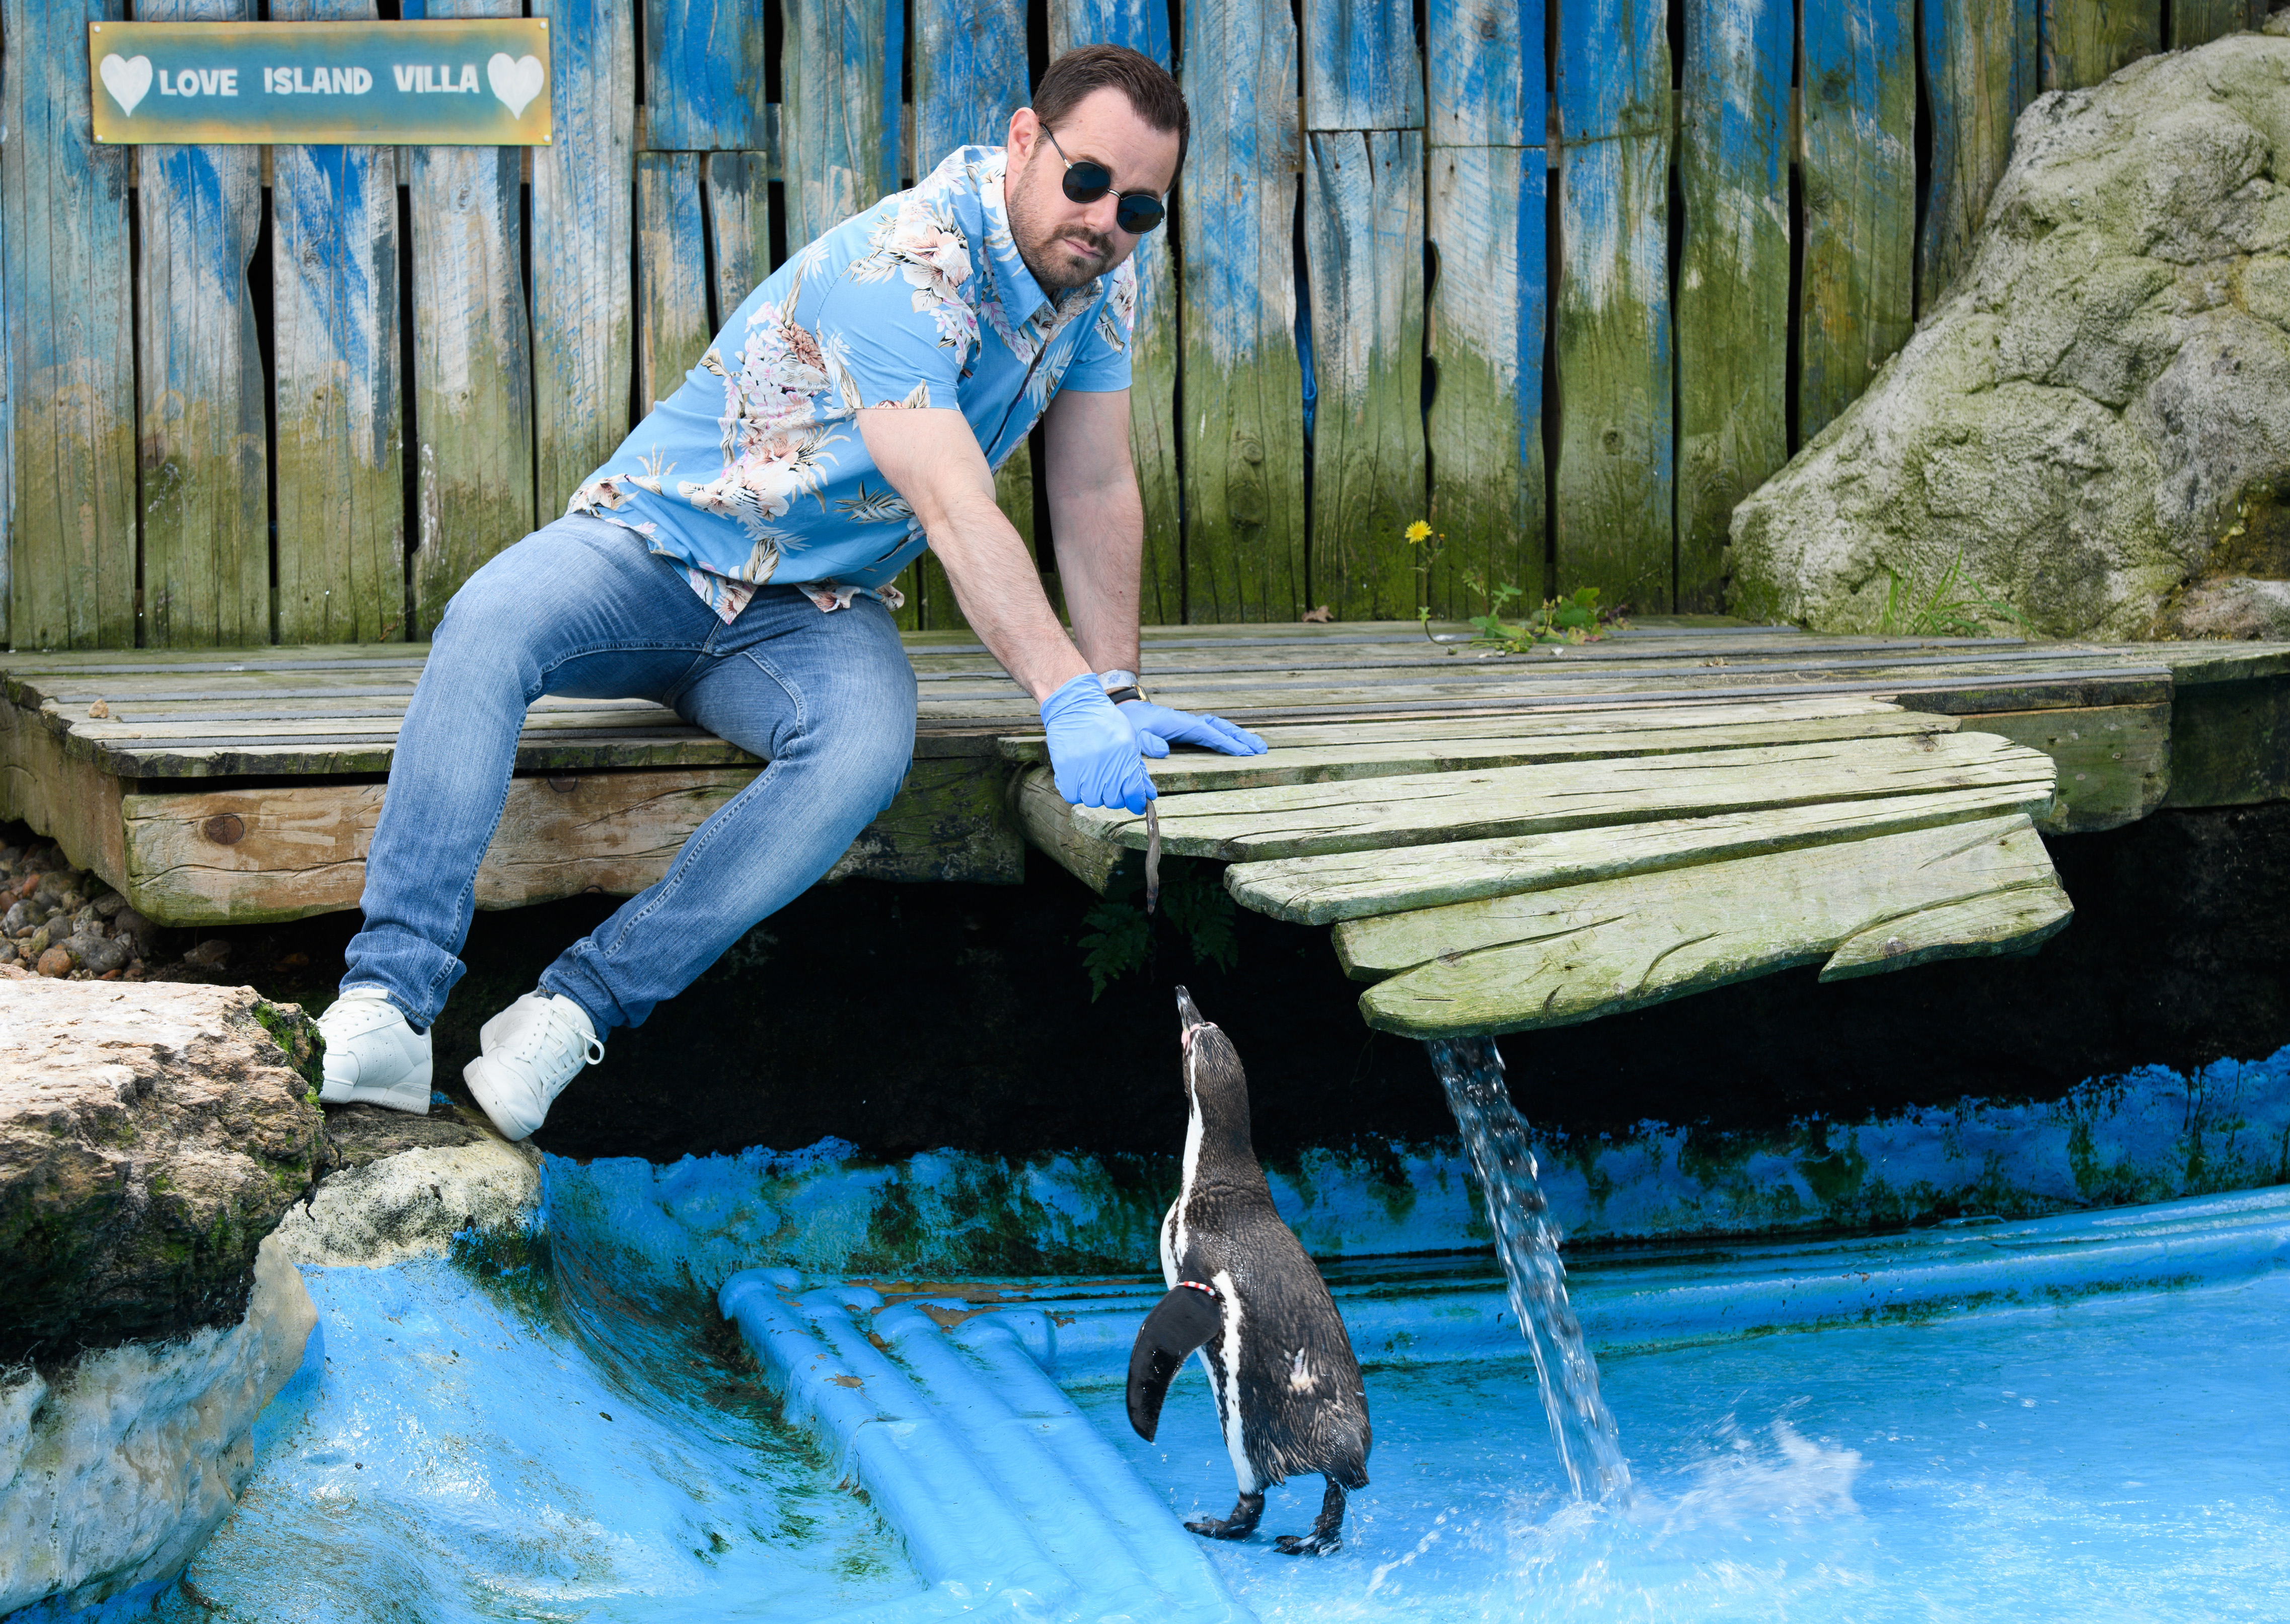  Danny Dyer visits Chessington World of Adventures Resort to launch Penguin Love Island (Chessington World of Adventure Resort)